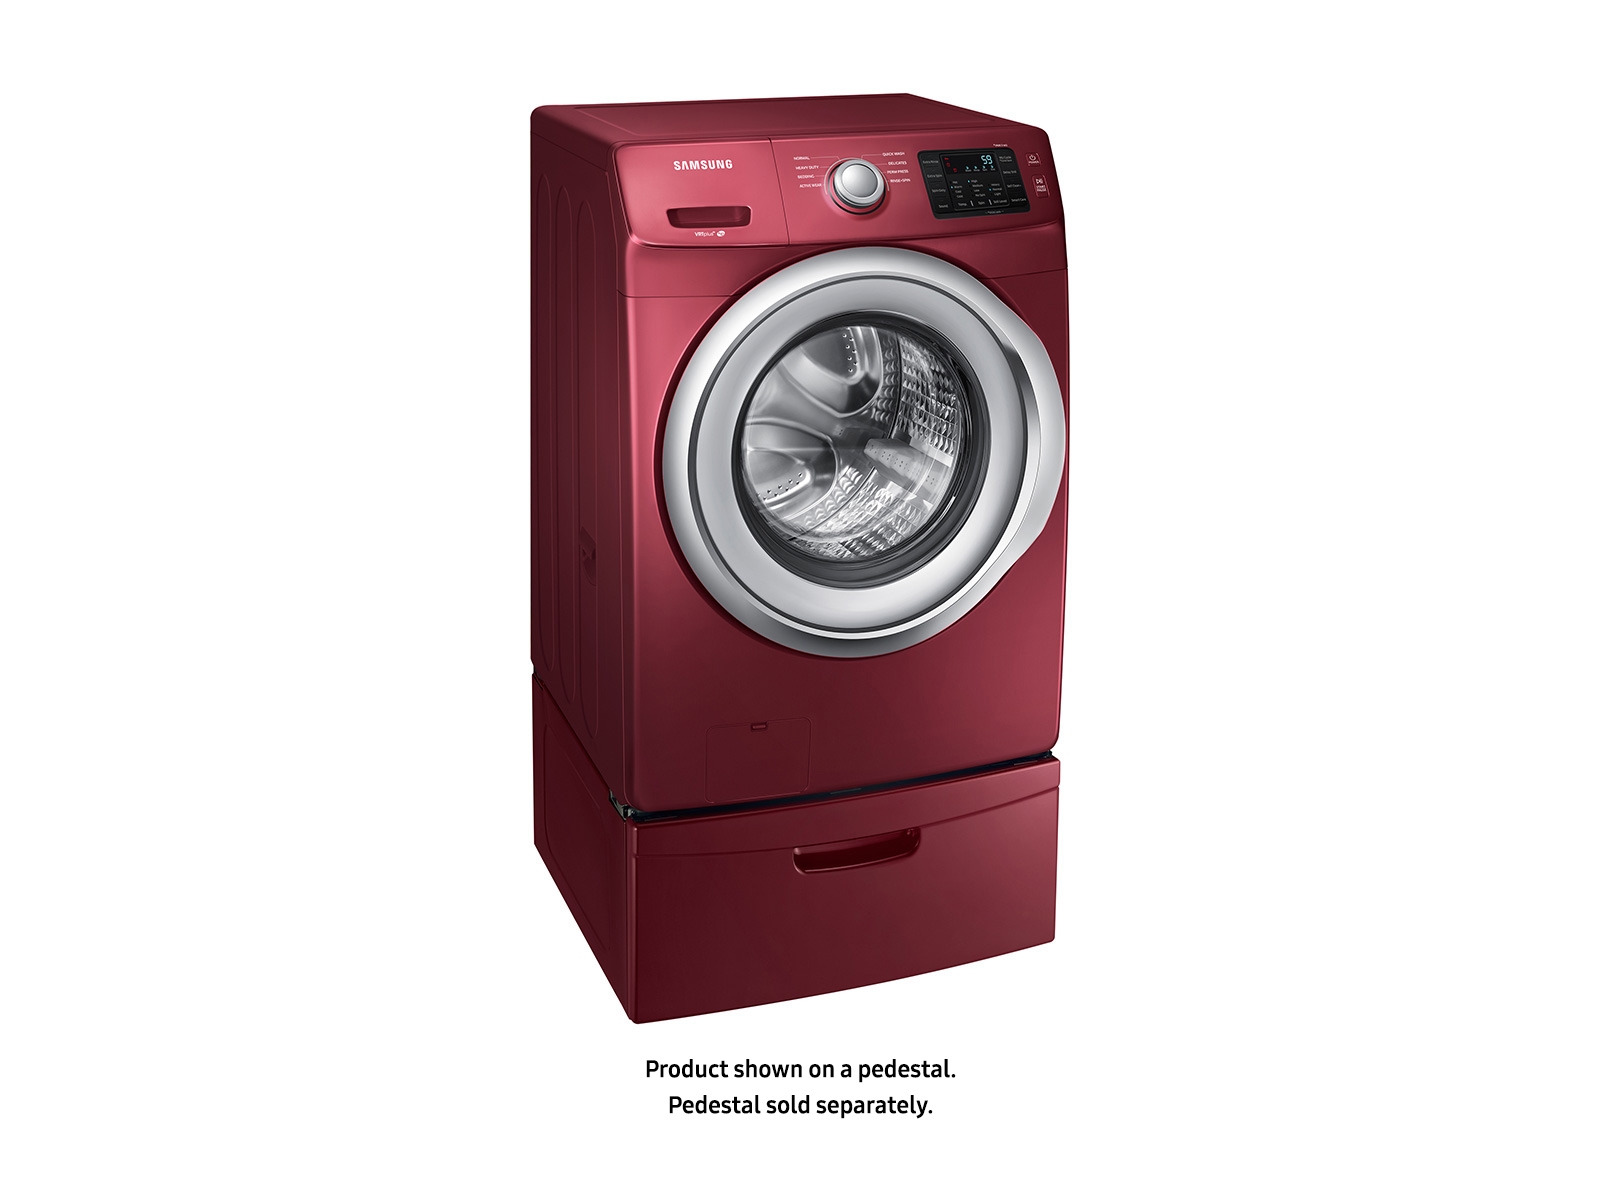 Samsung Washer and Dryer Sets & Reviews